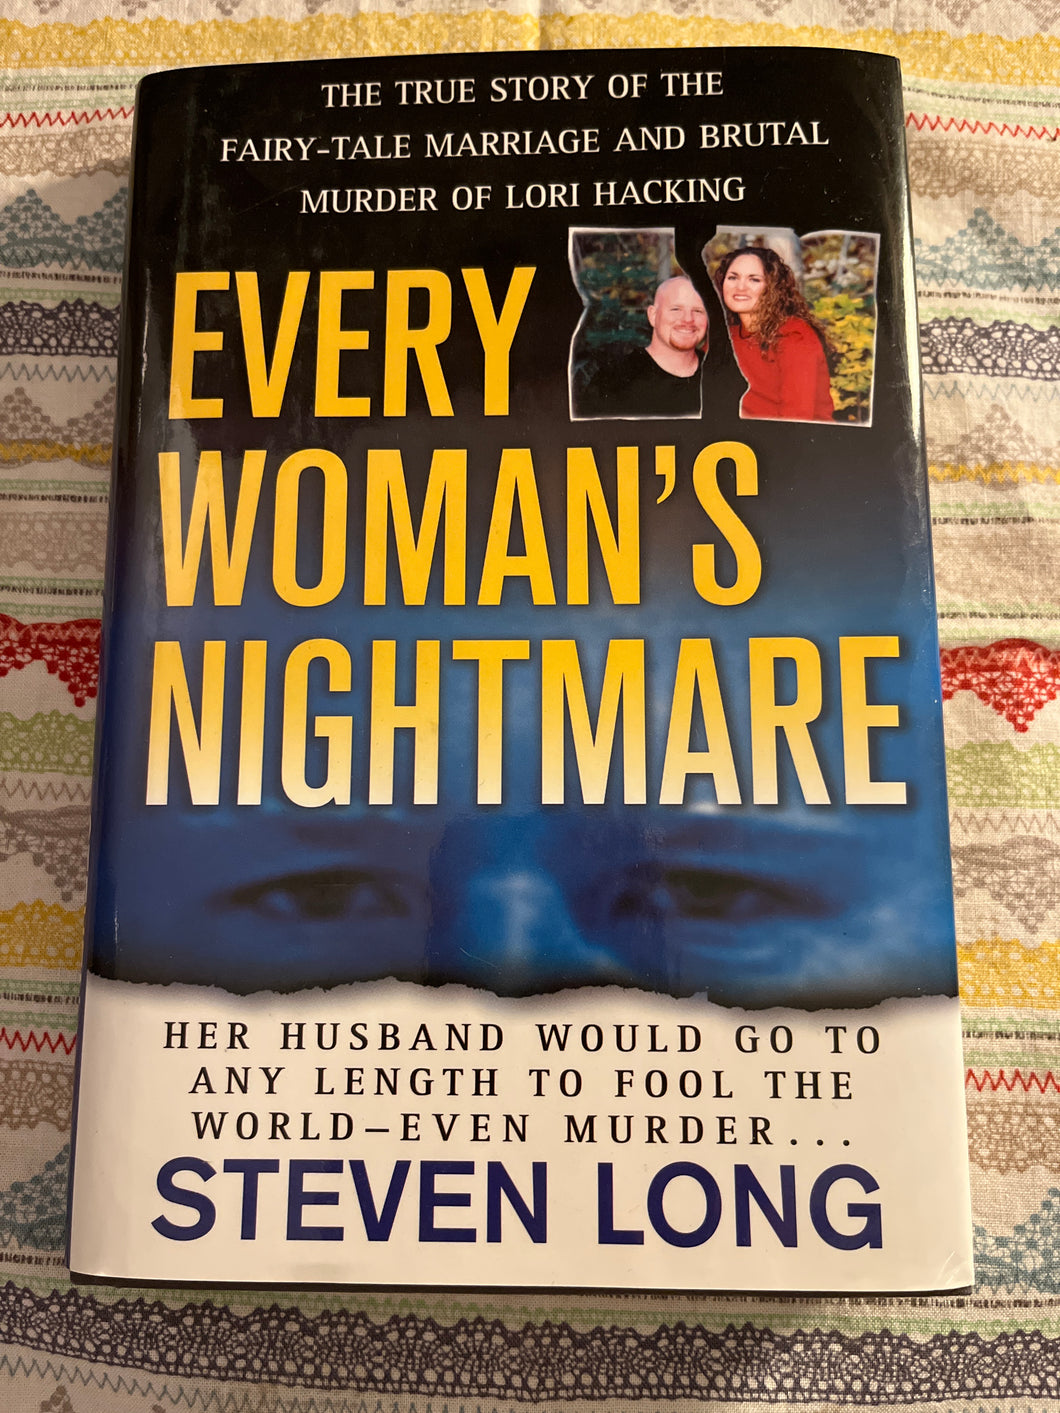 Every Woman's Nightmare: The True Story of the Fairy-Tale Marriage and Brutal Murder of Lori Hacking